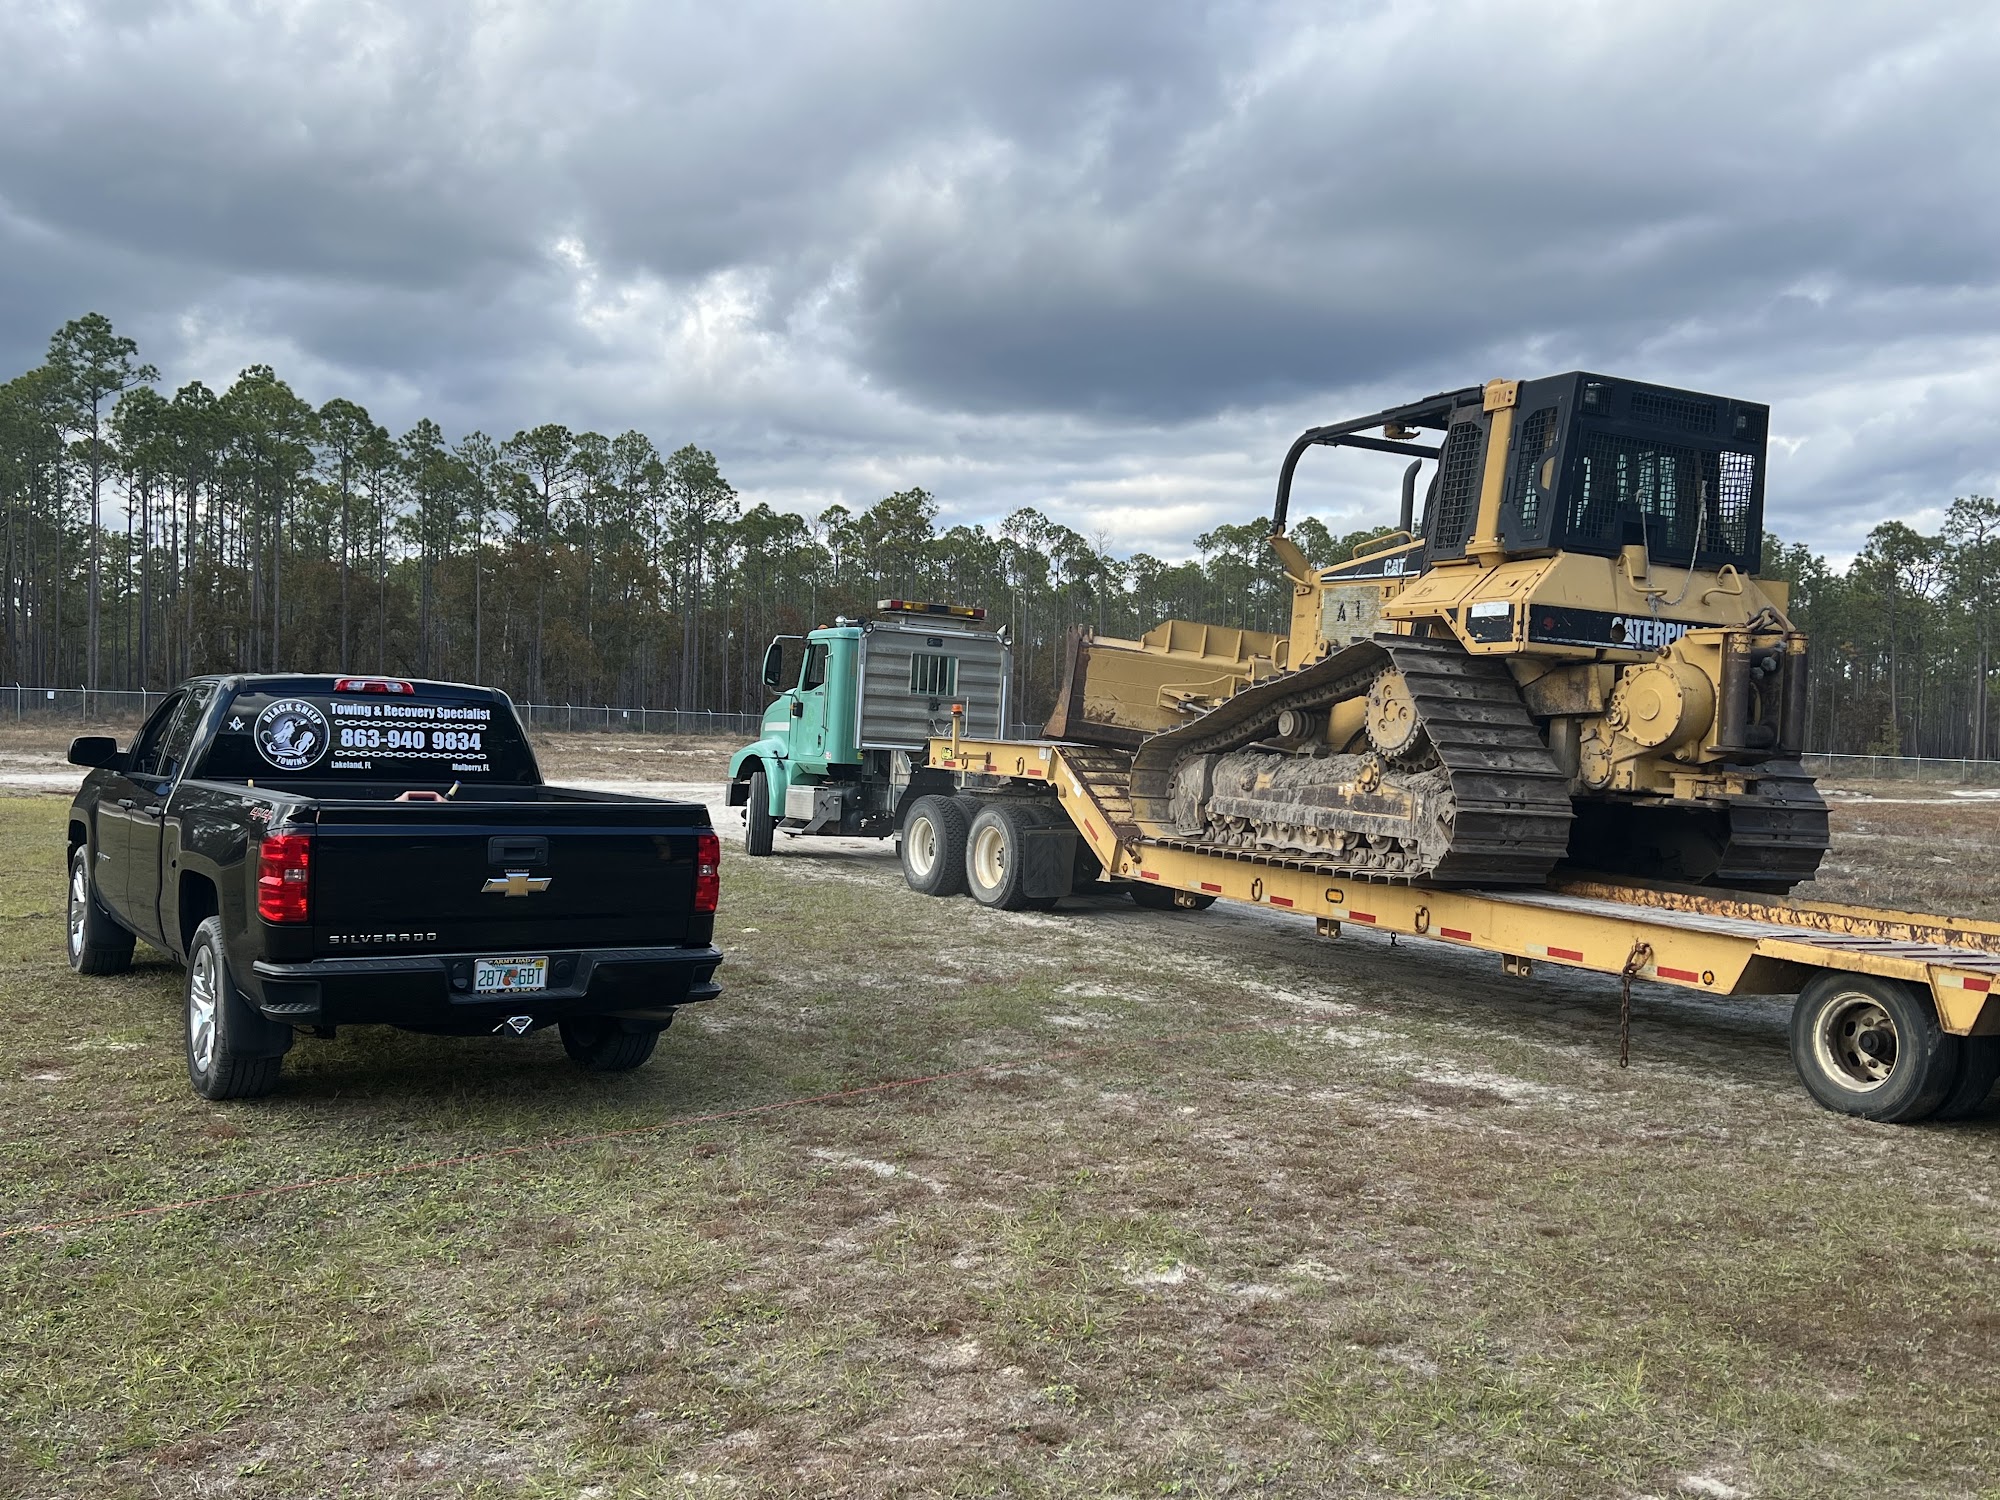 Black Sheep Towing, Inc 1860 Industrial Park Rd, Mulberry Florida 33860